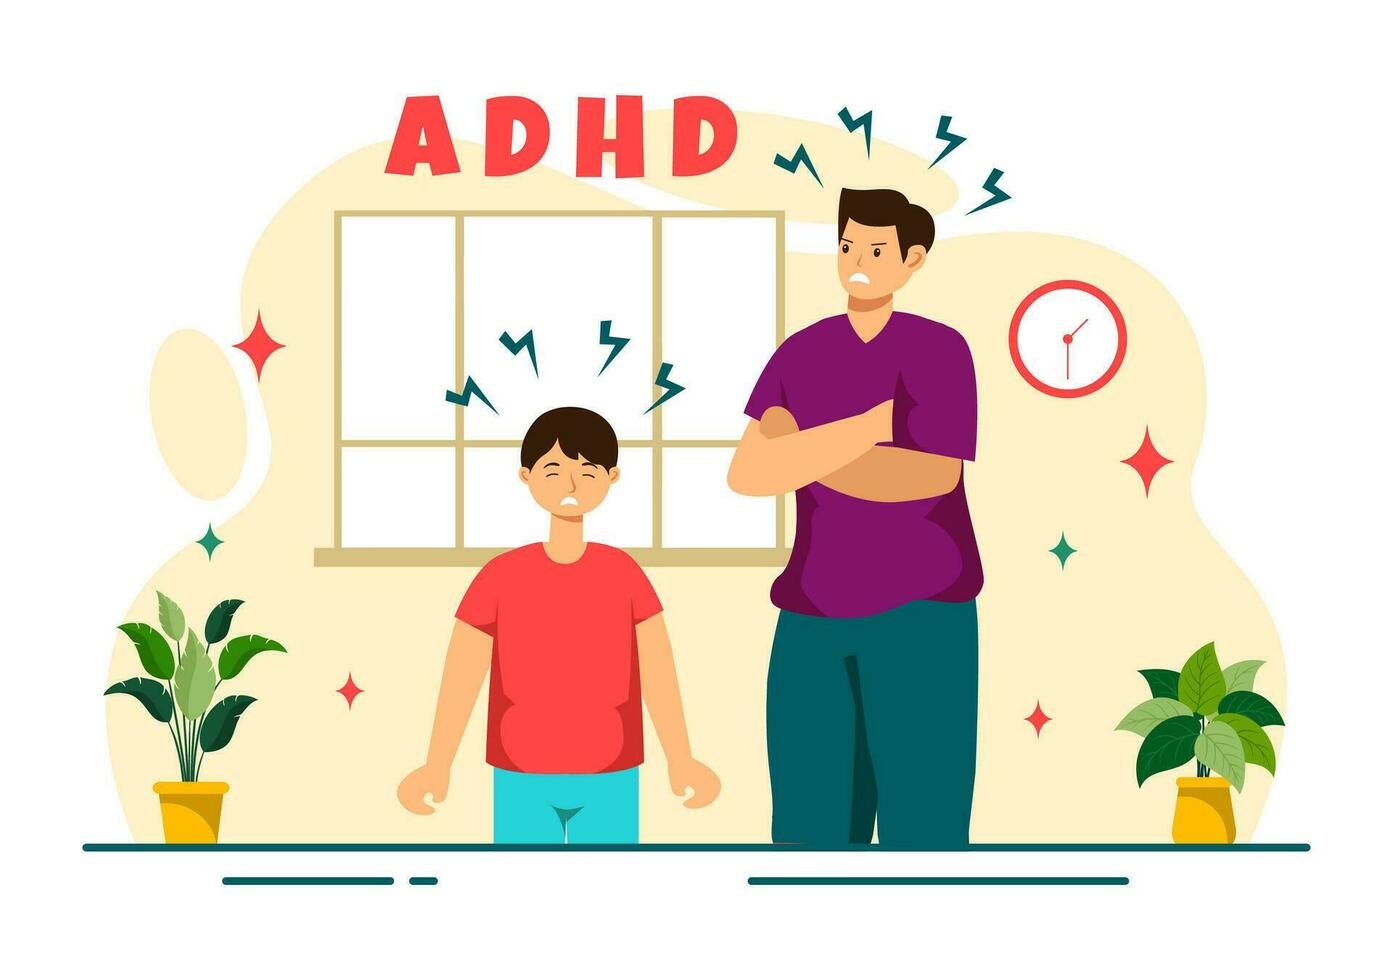 ADHD or Attention Deficit Hyperactivity Disorder Vector Illustration with Kids Impulsive and Hyperactive Behavior in Mental health and Psychology